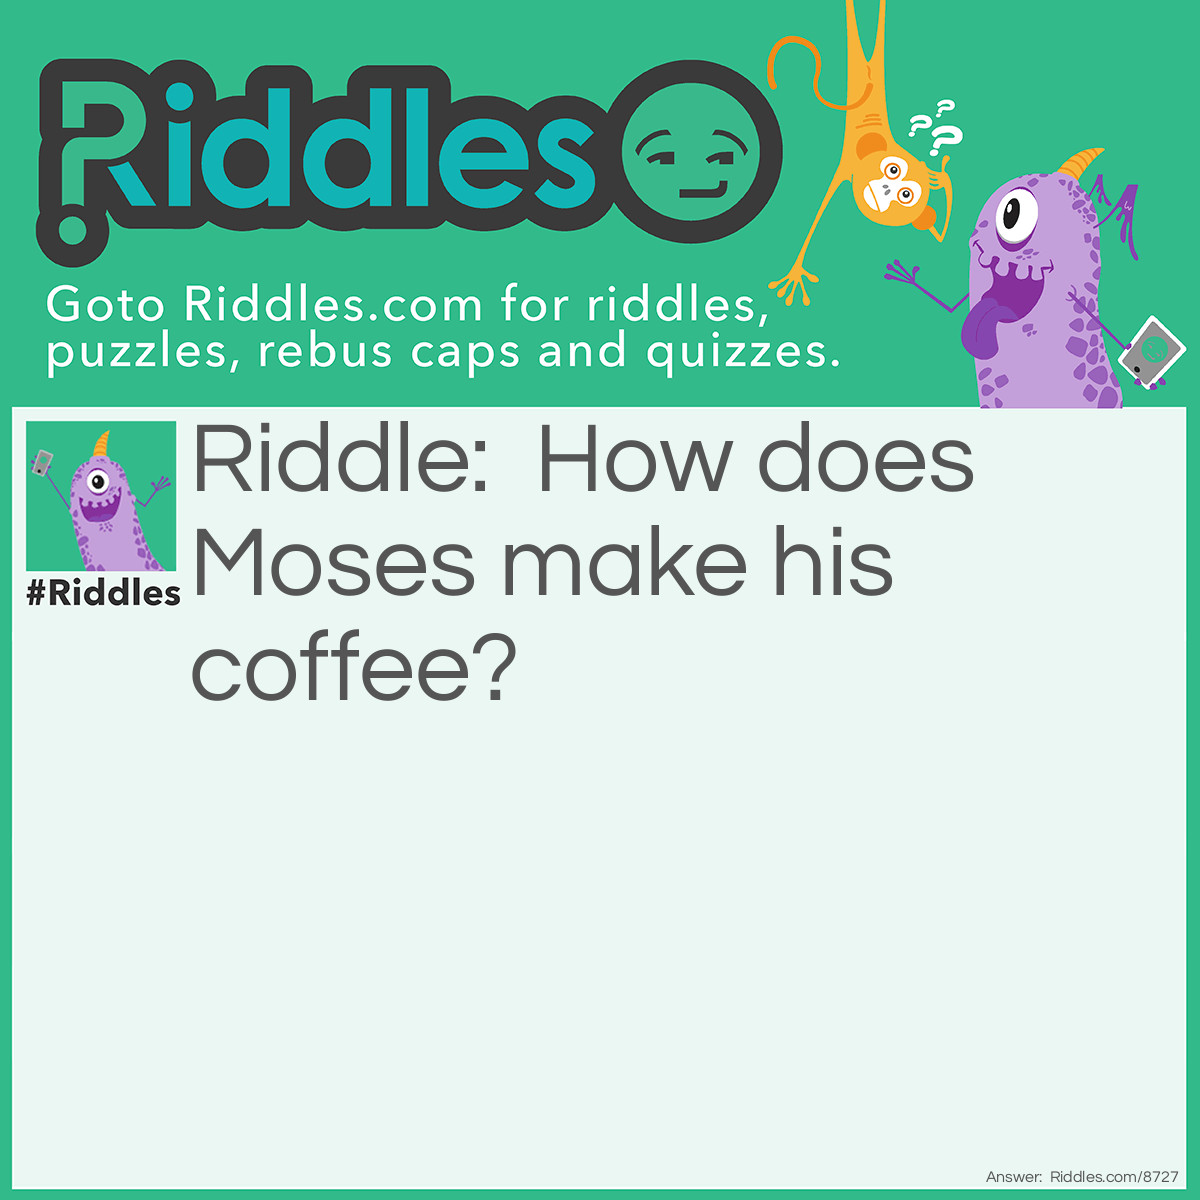 Riddle: How does Moses make his coffee? Answer: Hebrews it.